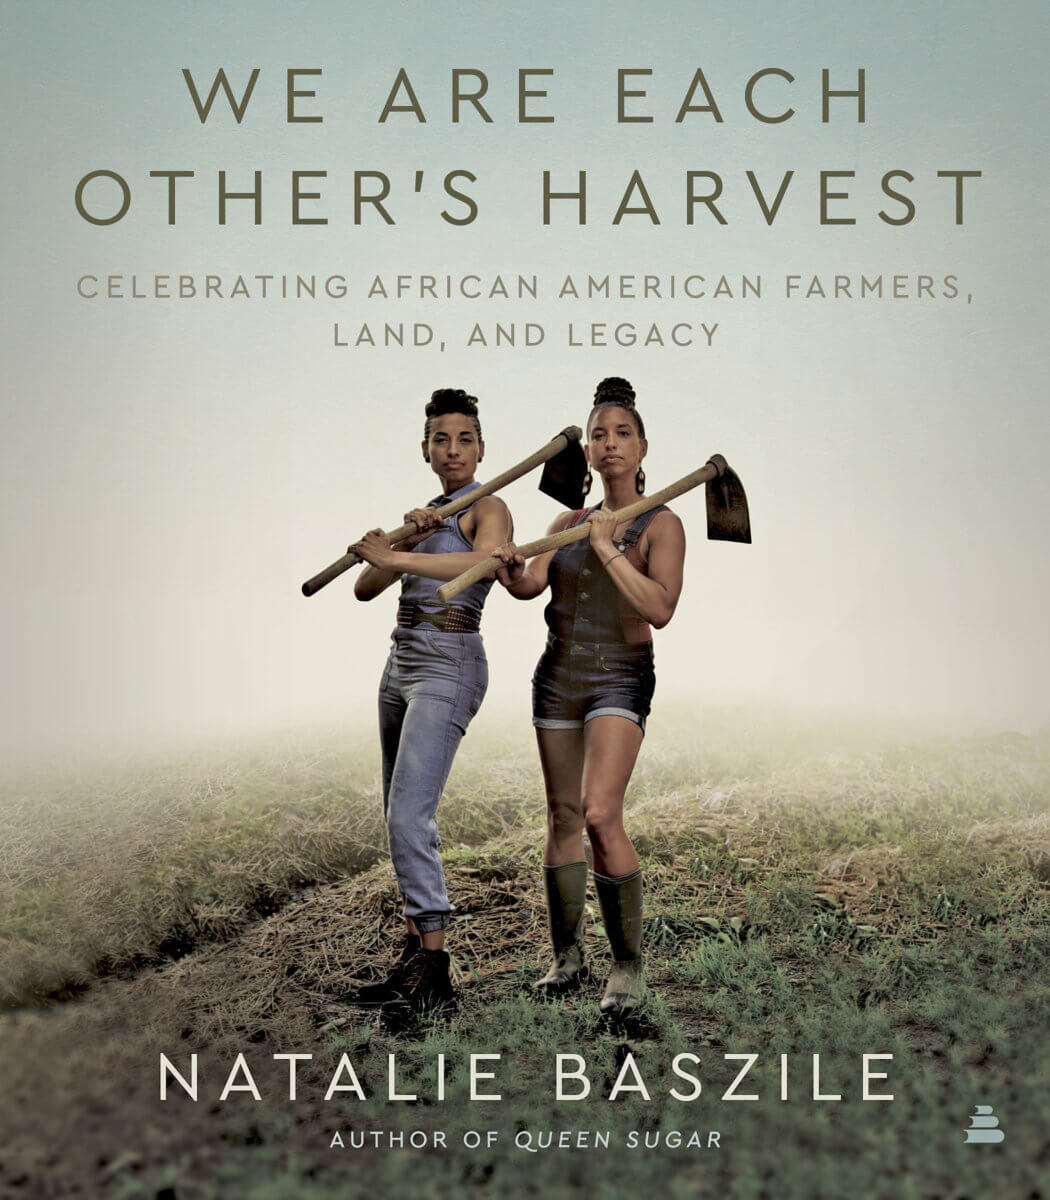 celebrating-african-american-farmers-2021-04-09-ts-cl01